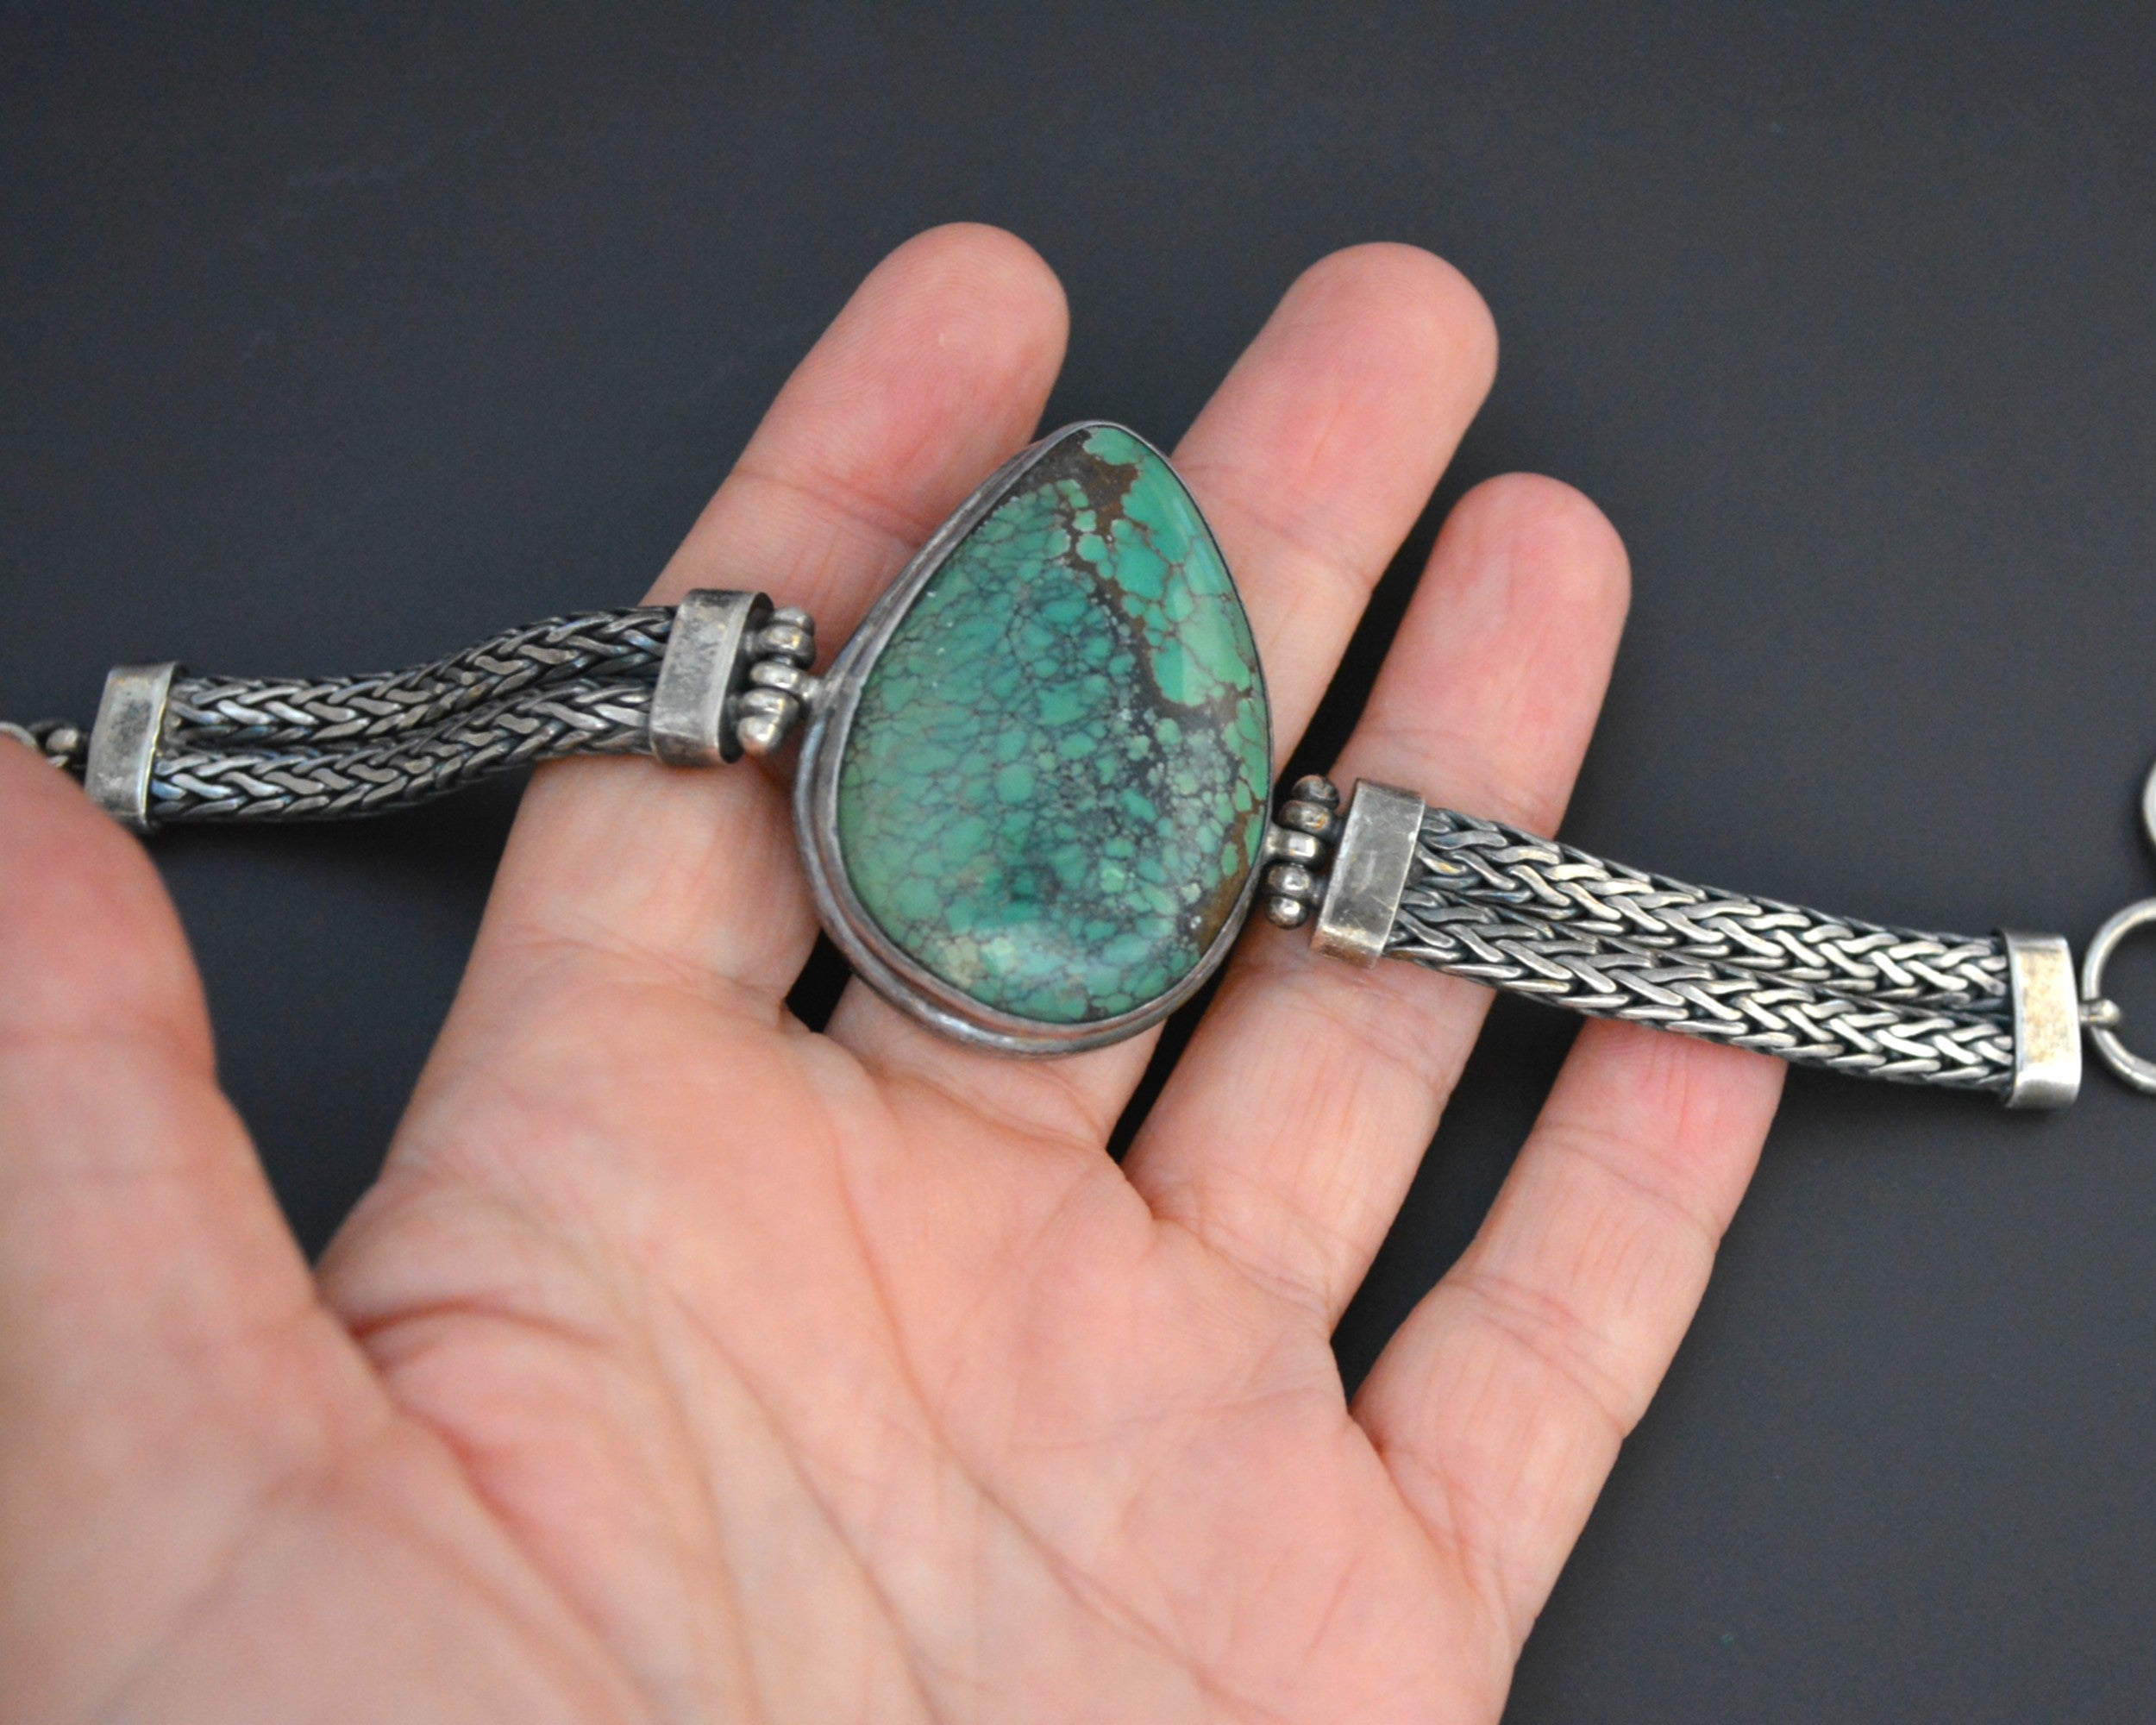 Reserved for S. - Turquoise Silver Snake Chain Bracelet